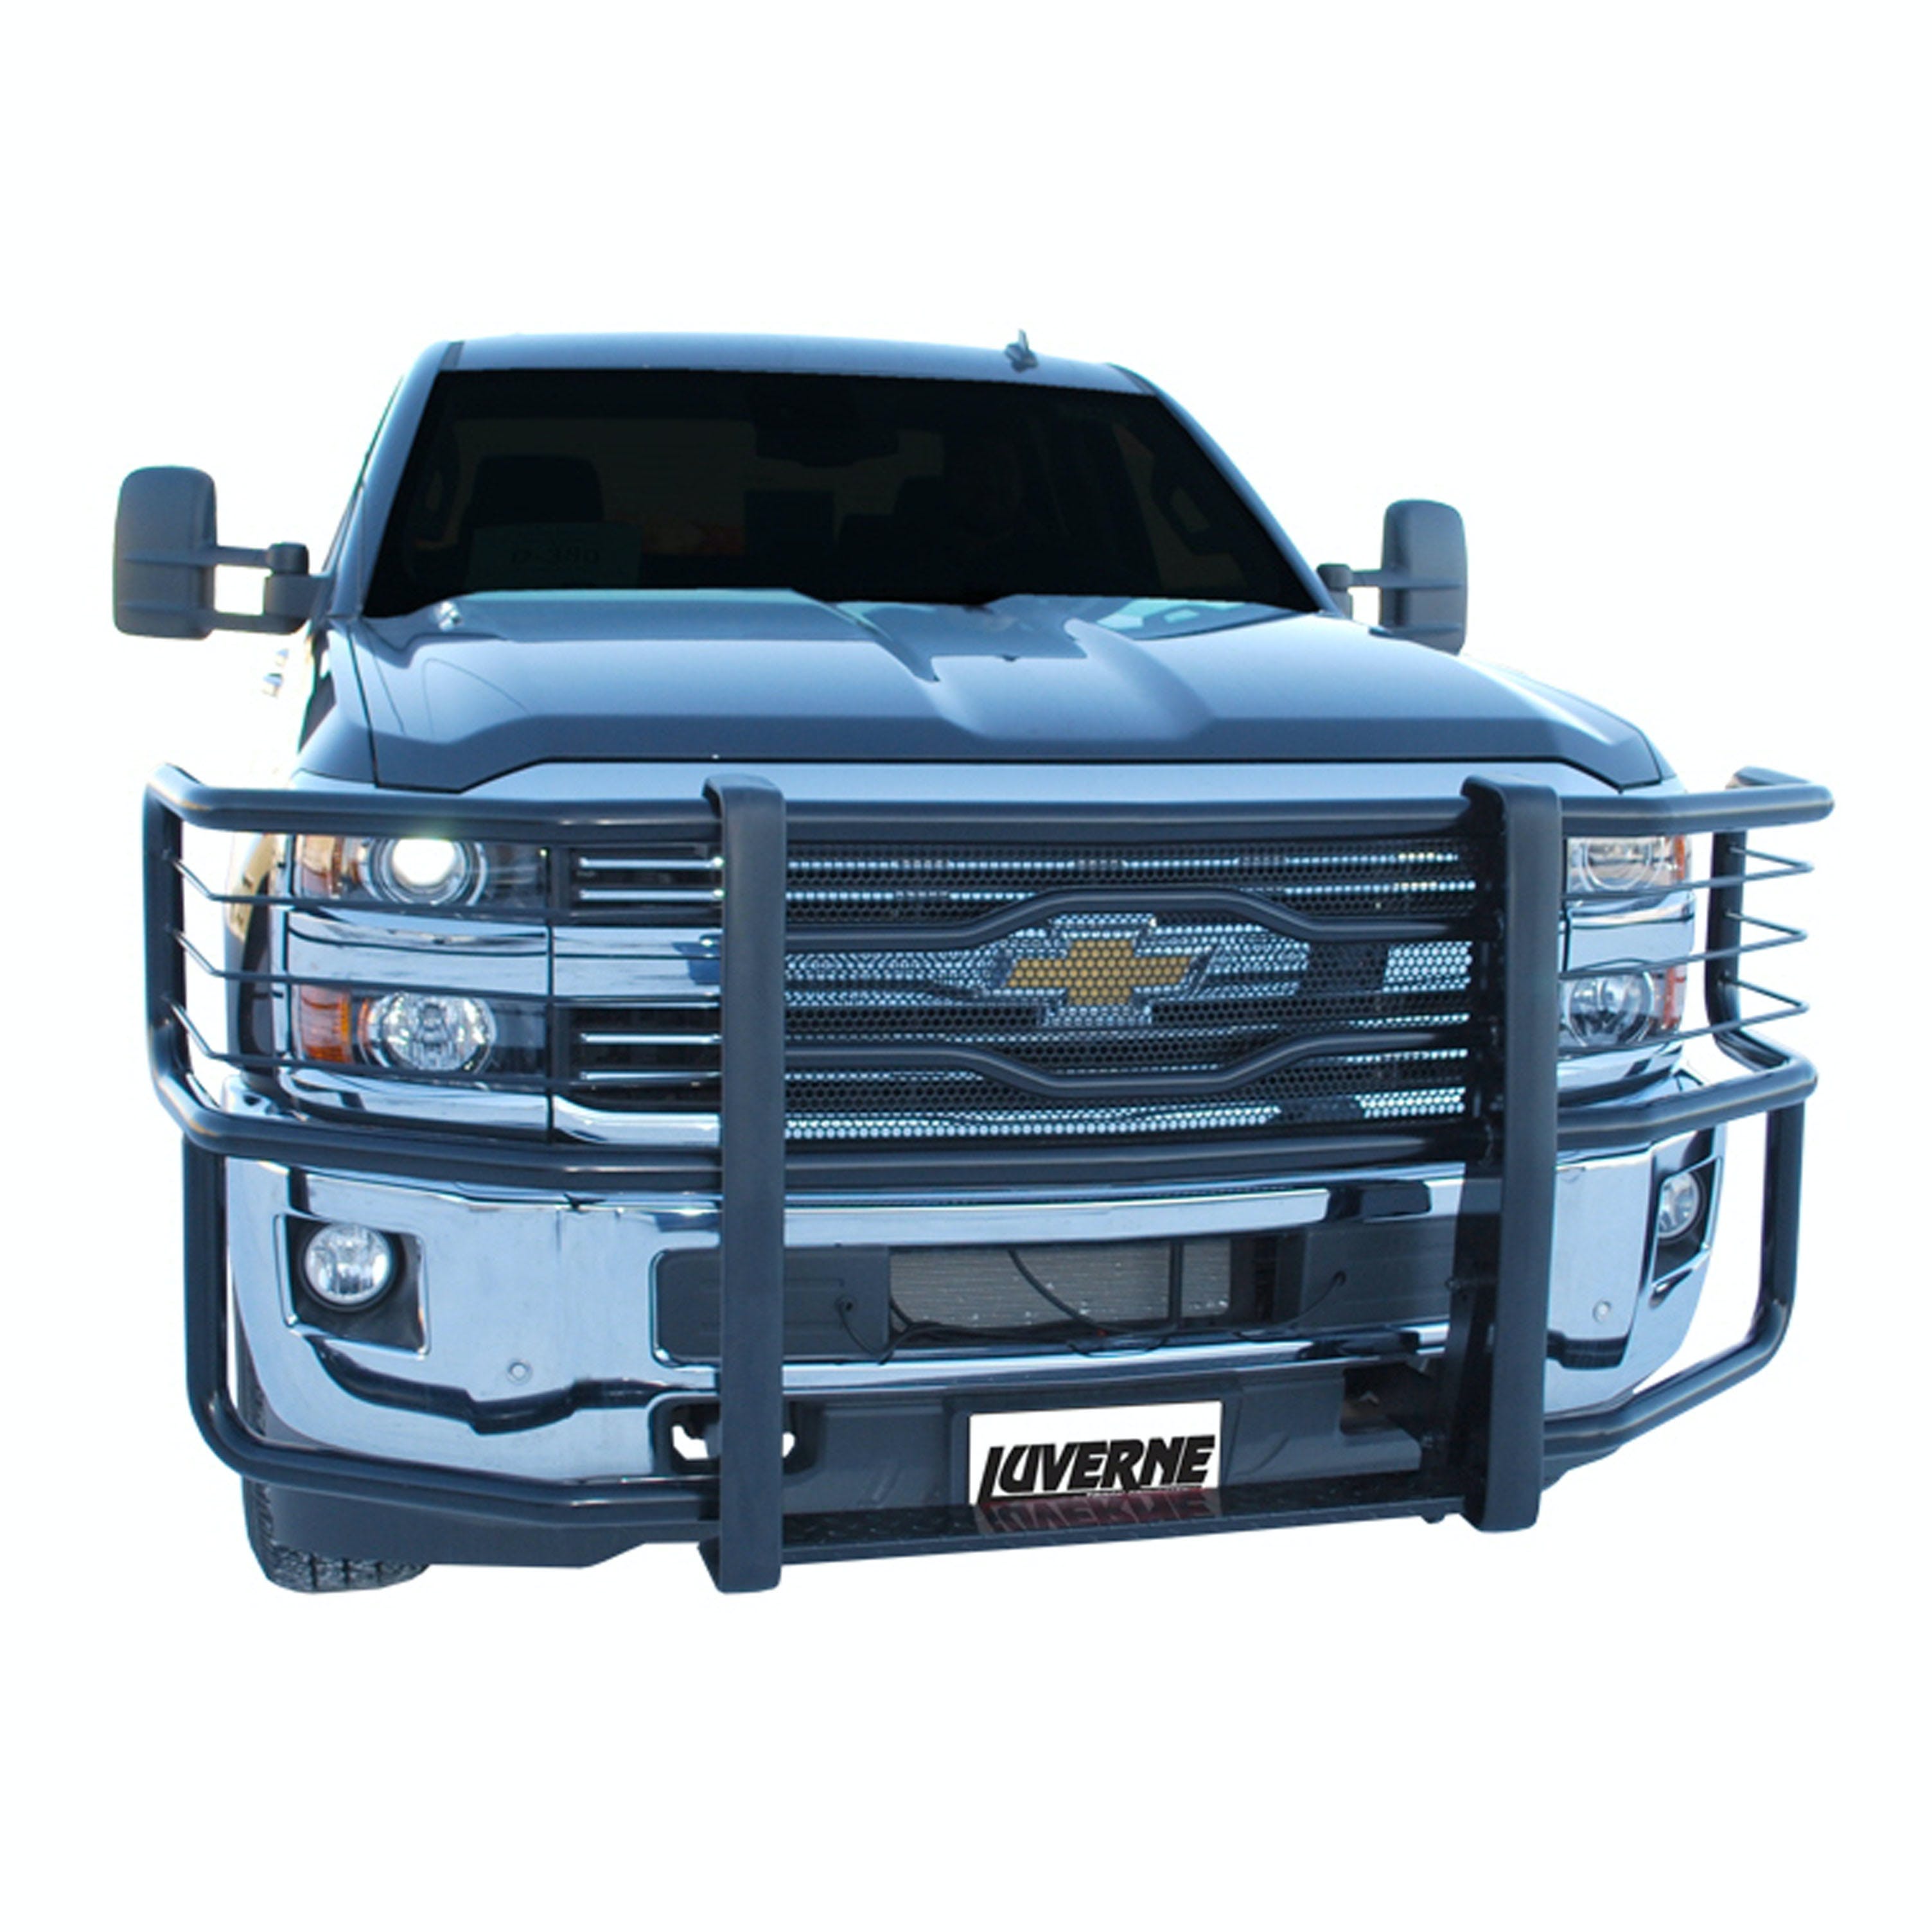 LUVERNE 321512 Prowler Max Grille Guard Brackets